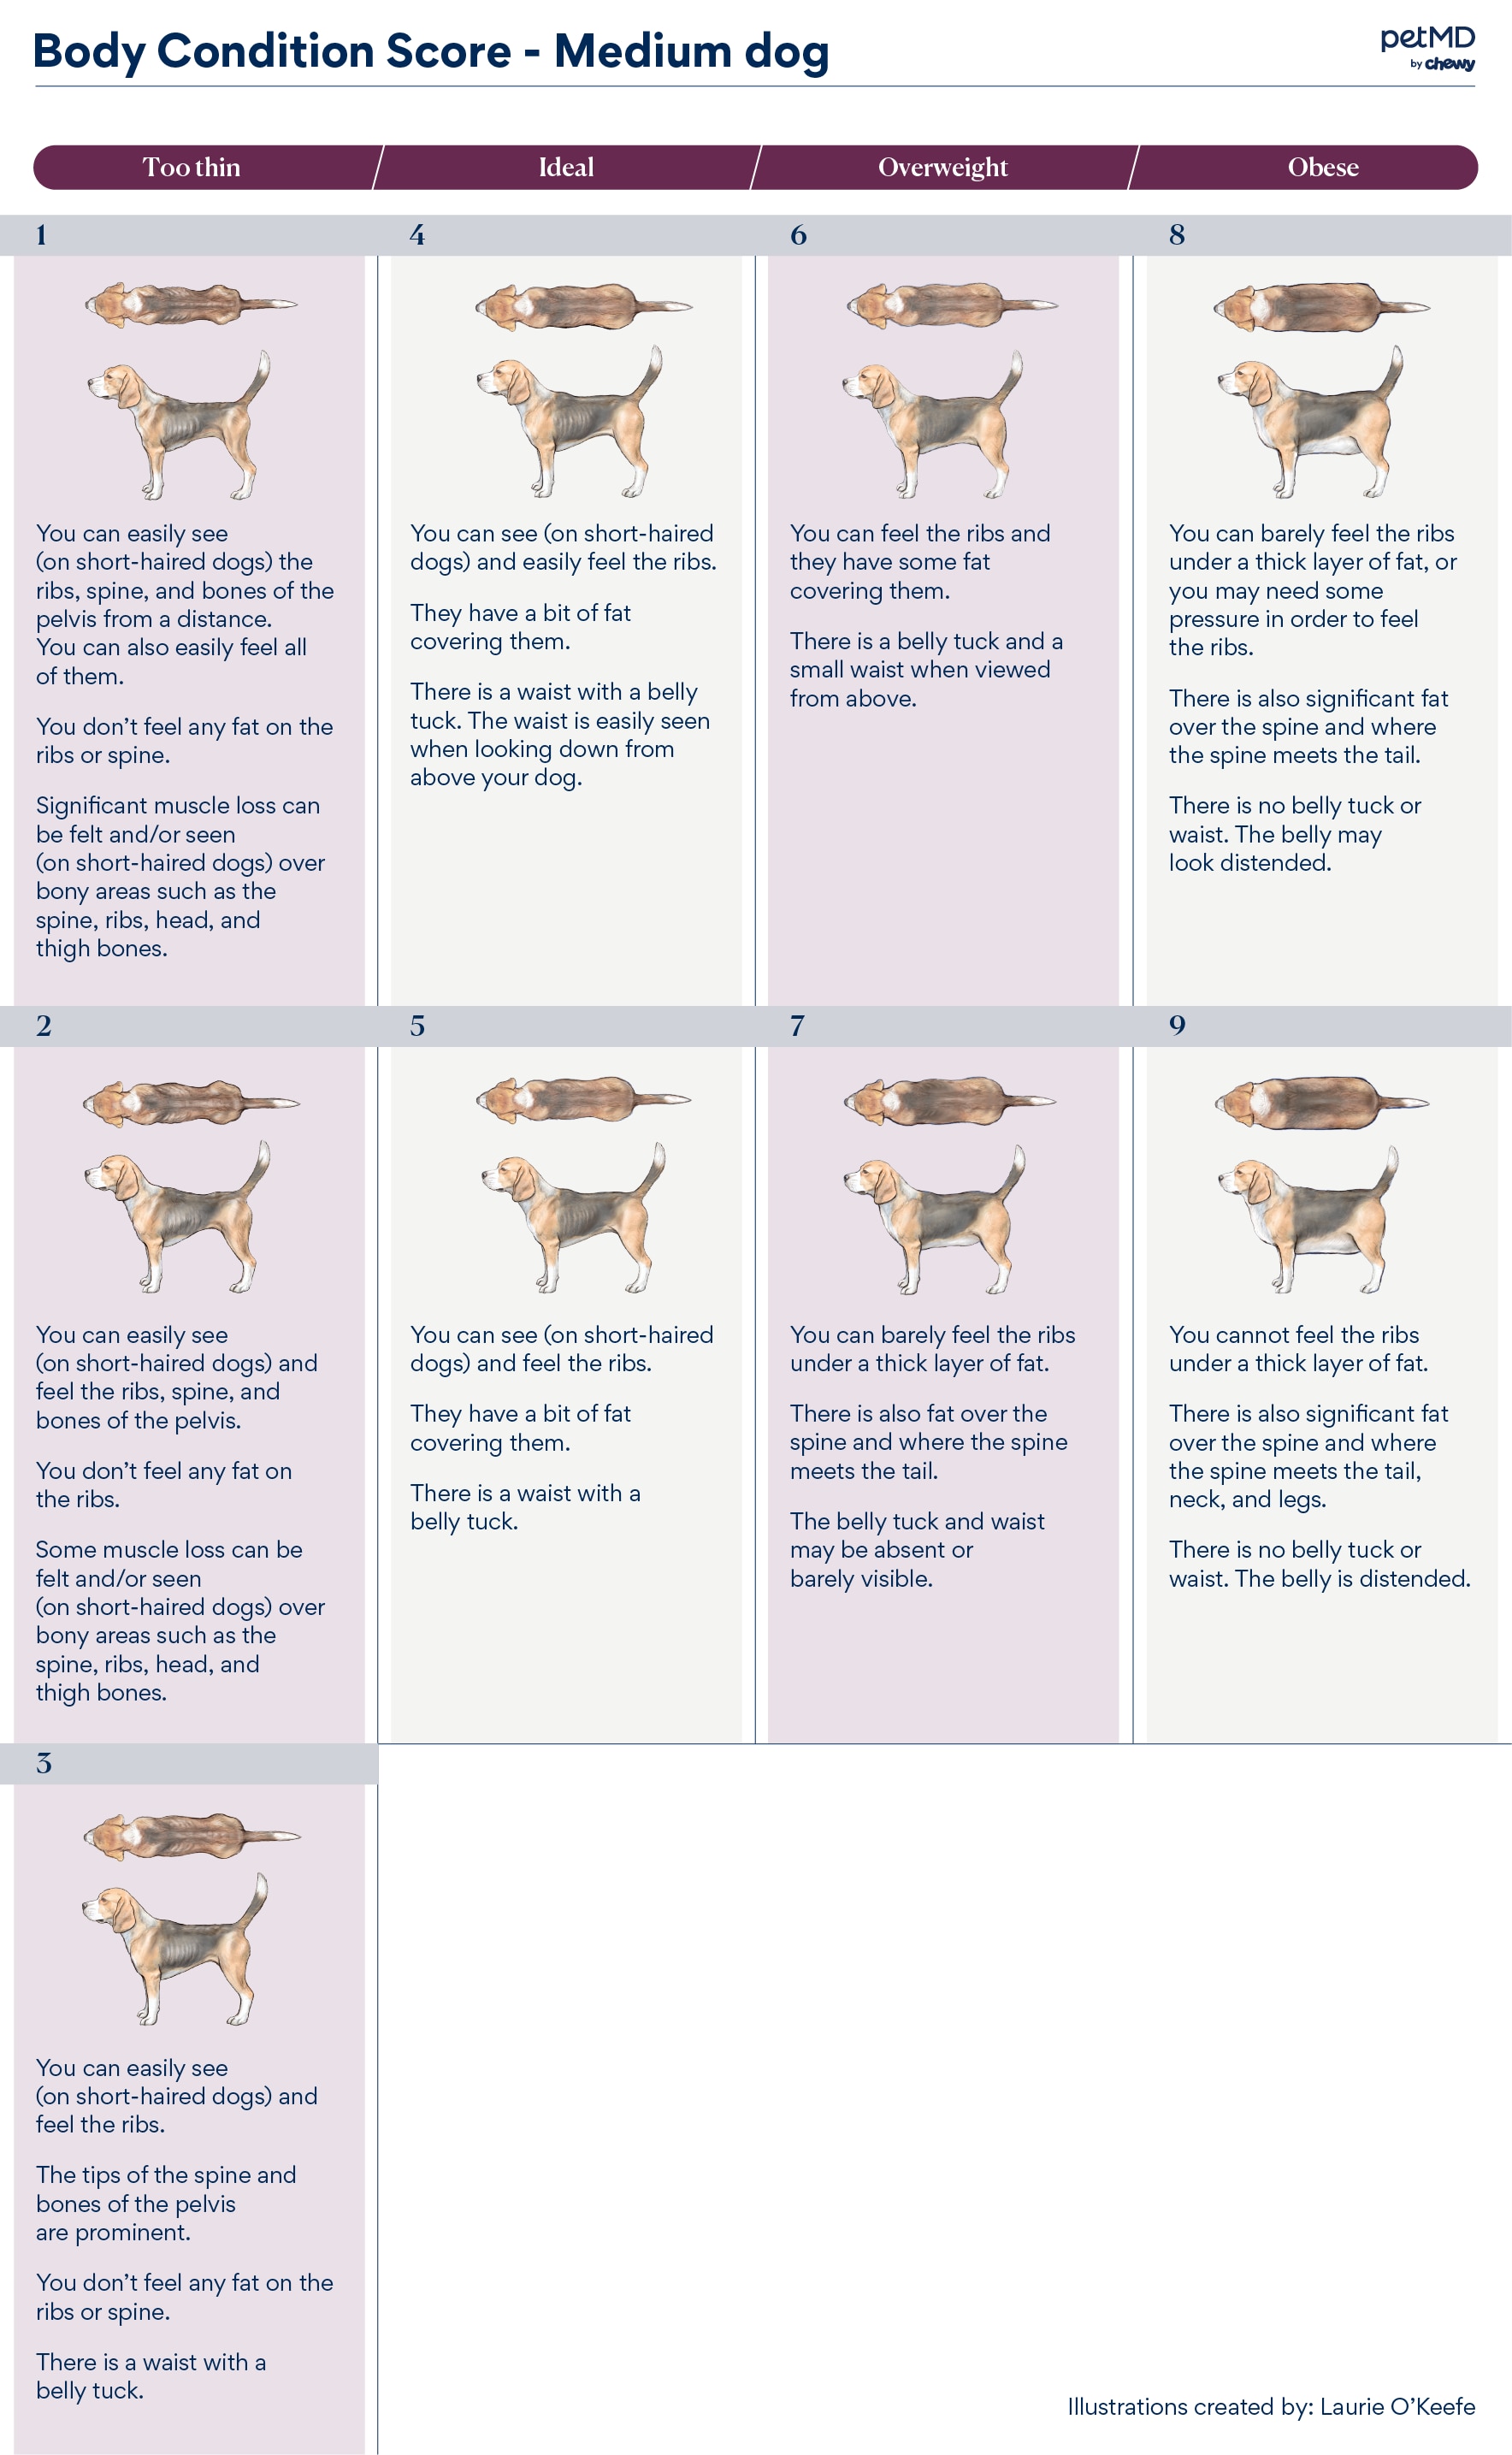 body condition score chart for medium breed dogs